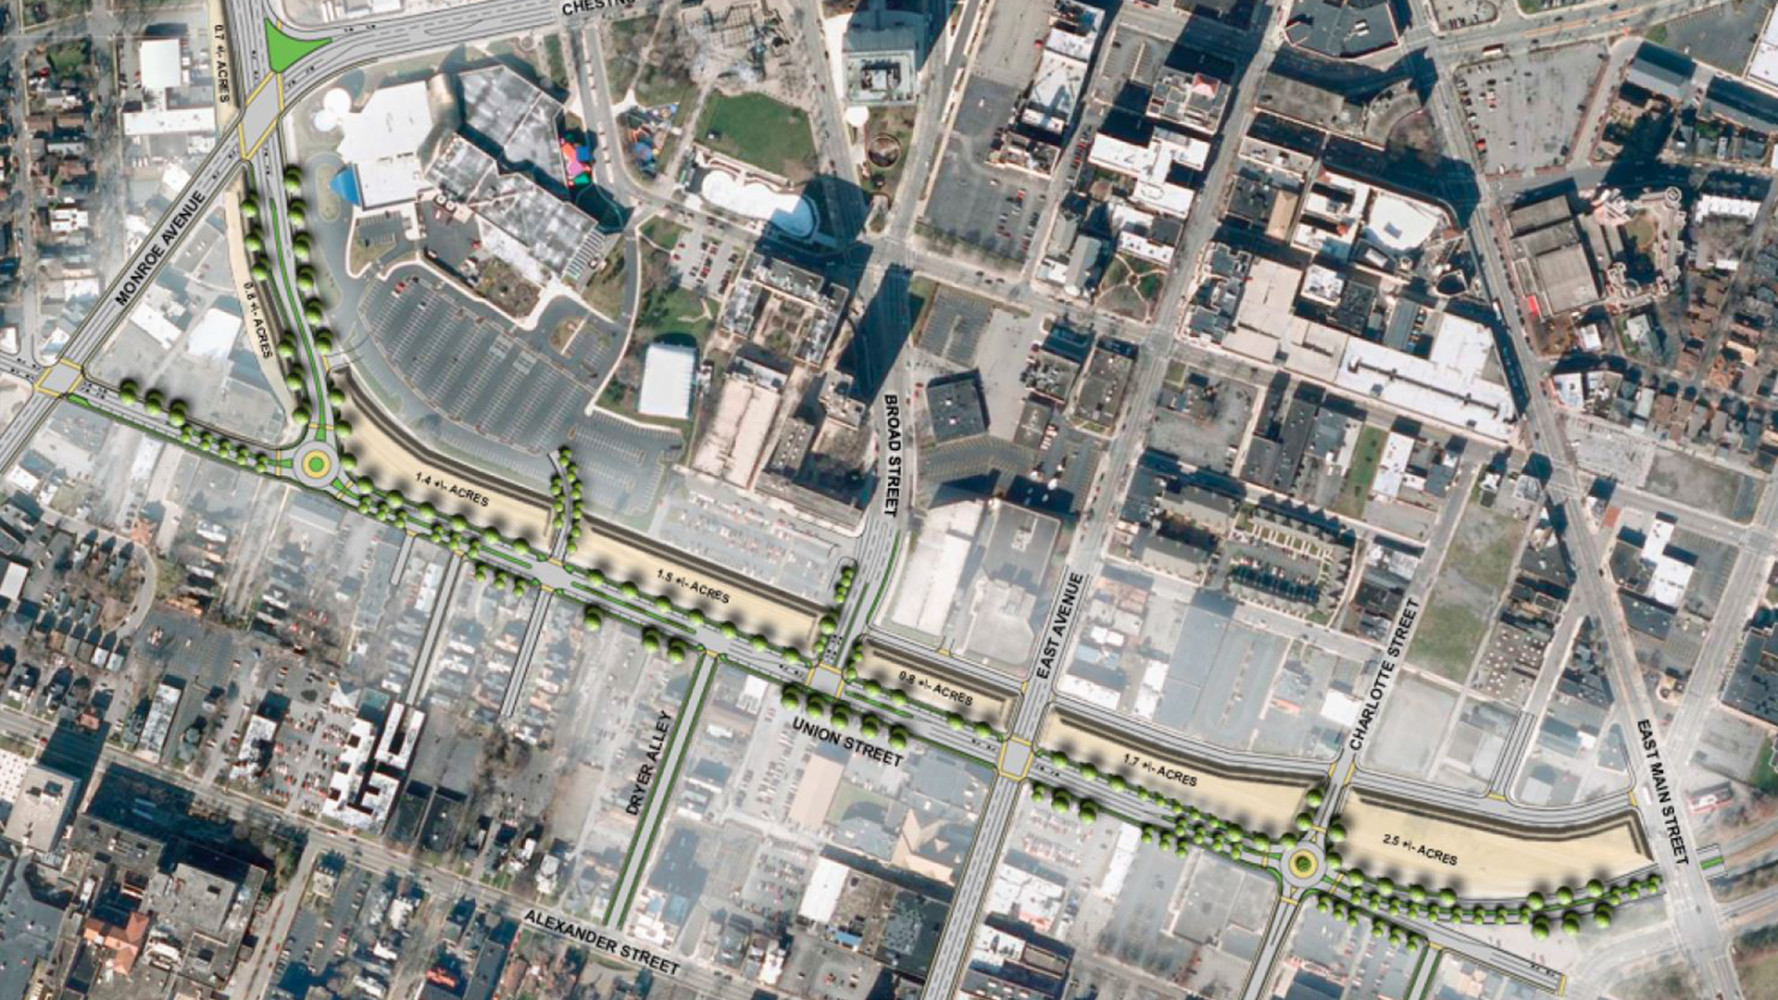 Conceptual design to transform the Inner Loop Highway to better meet the community's needs for access, neighborhood cohesion and land use. (Image credit: Inner Loop Improvement Study)